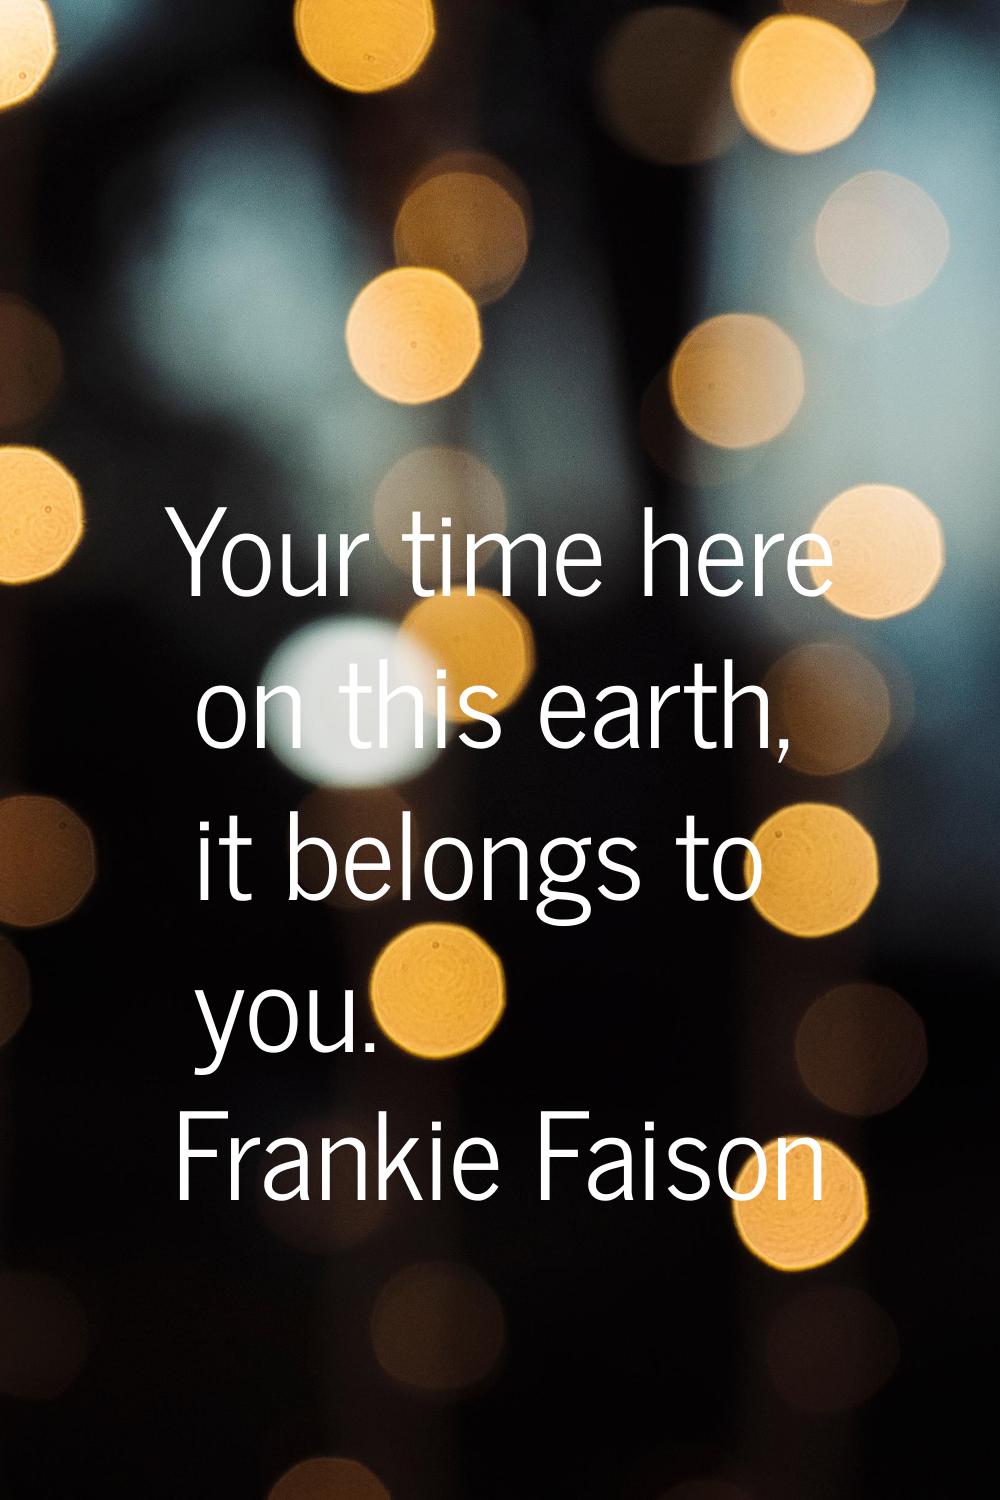 Your time here on this earth, it belongs to you.